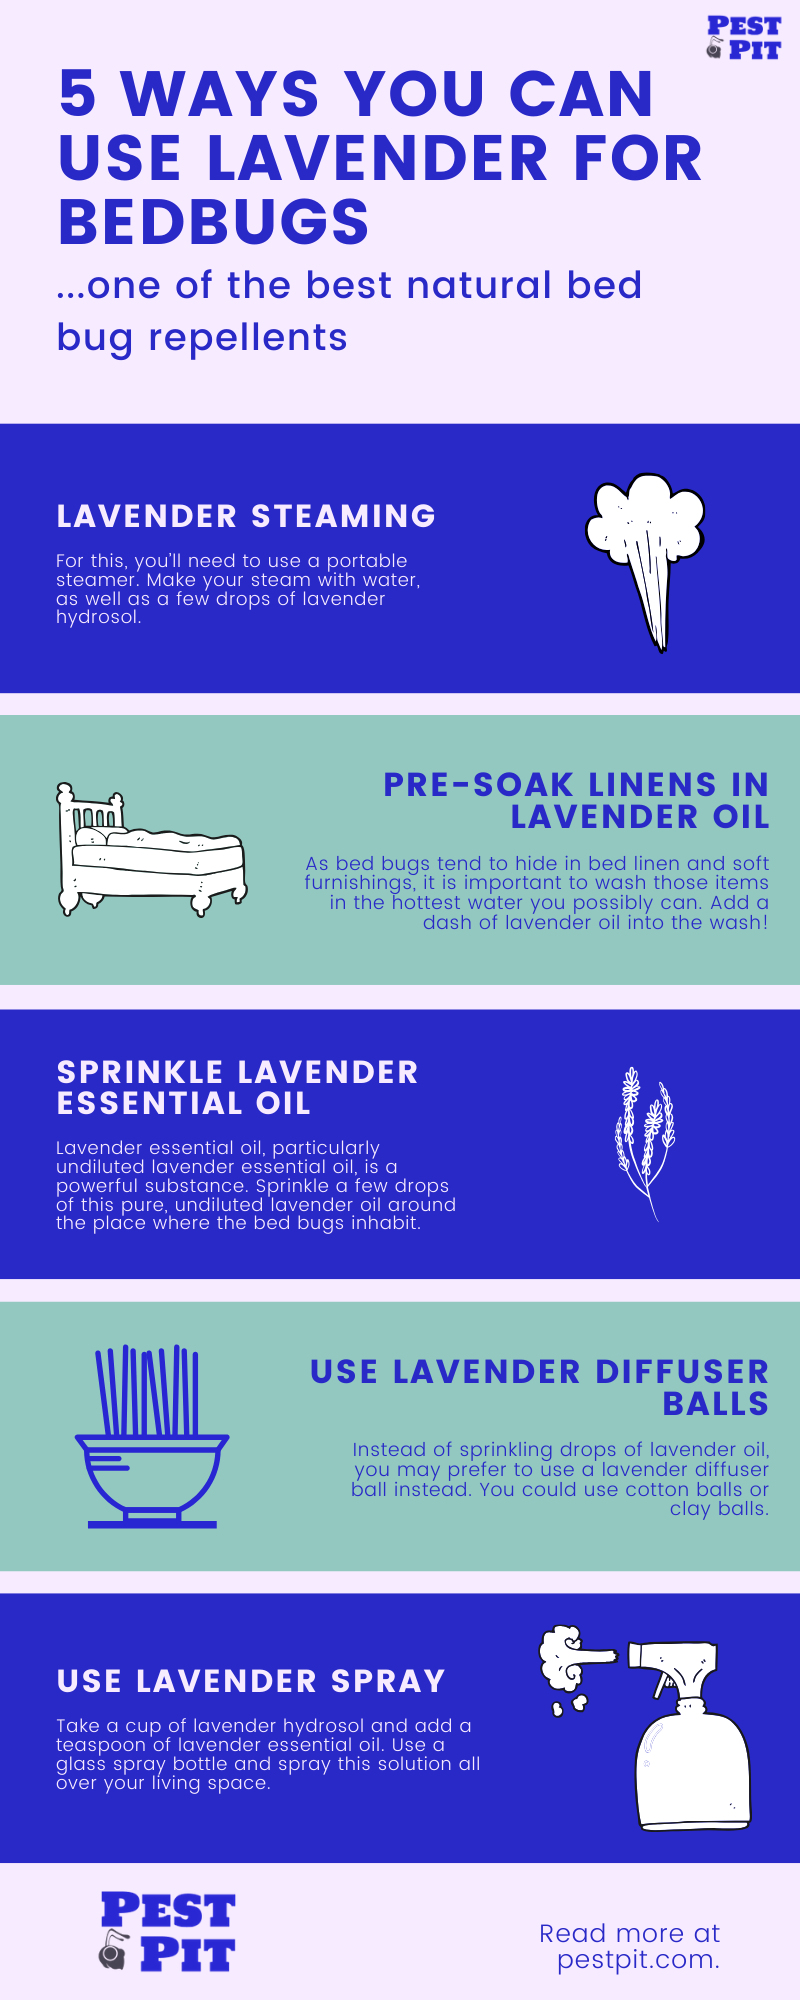 5 ways you can use LAVENDER for bedbugs Infographic